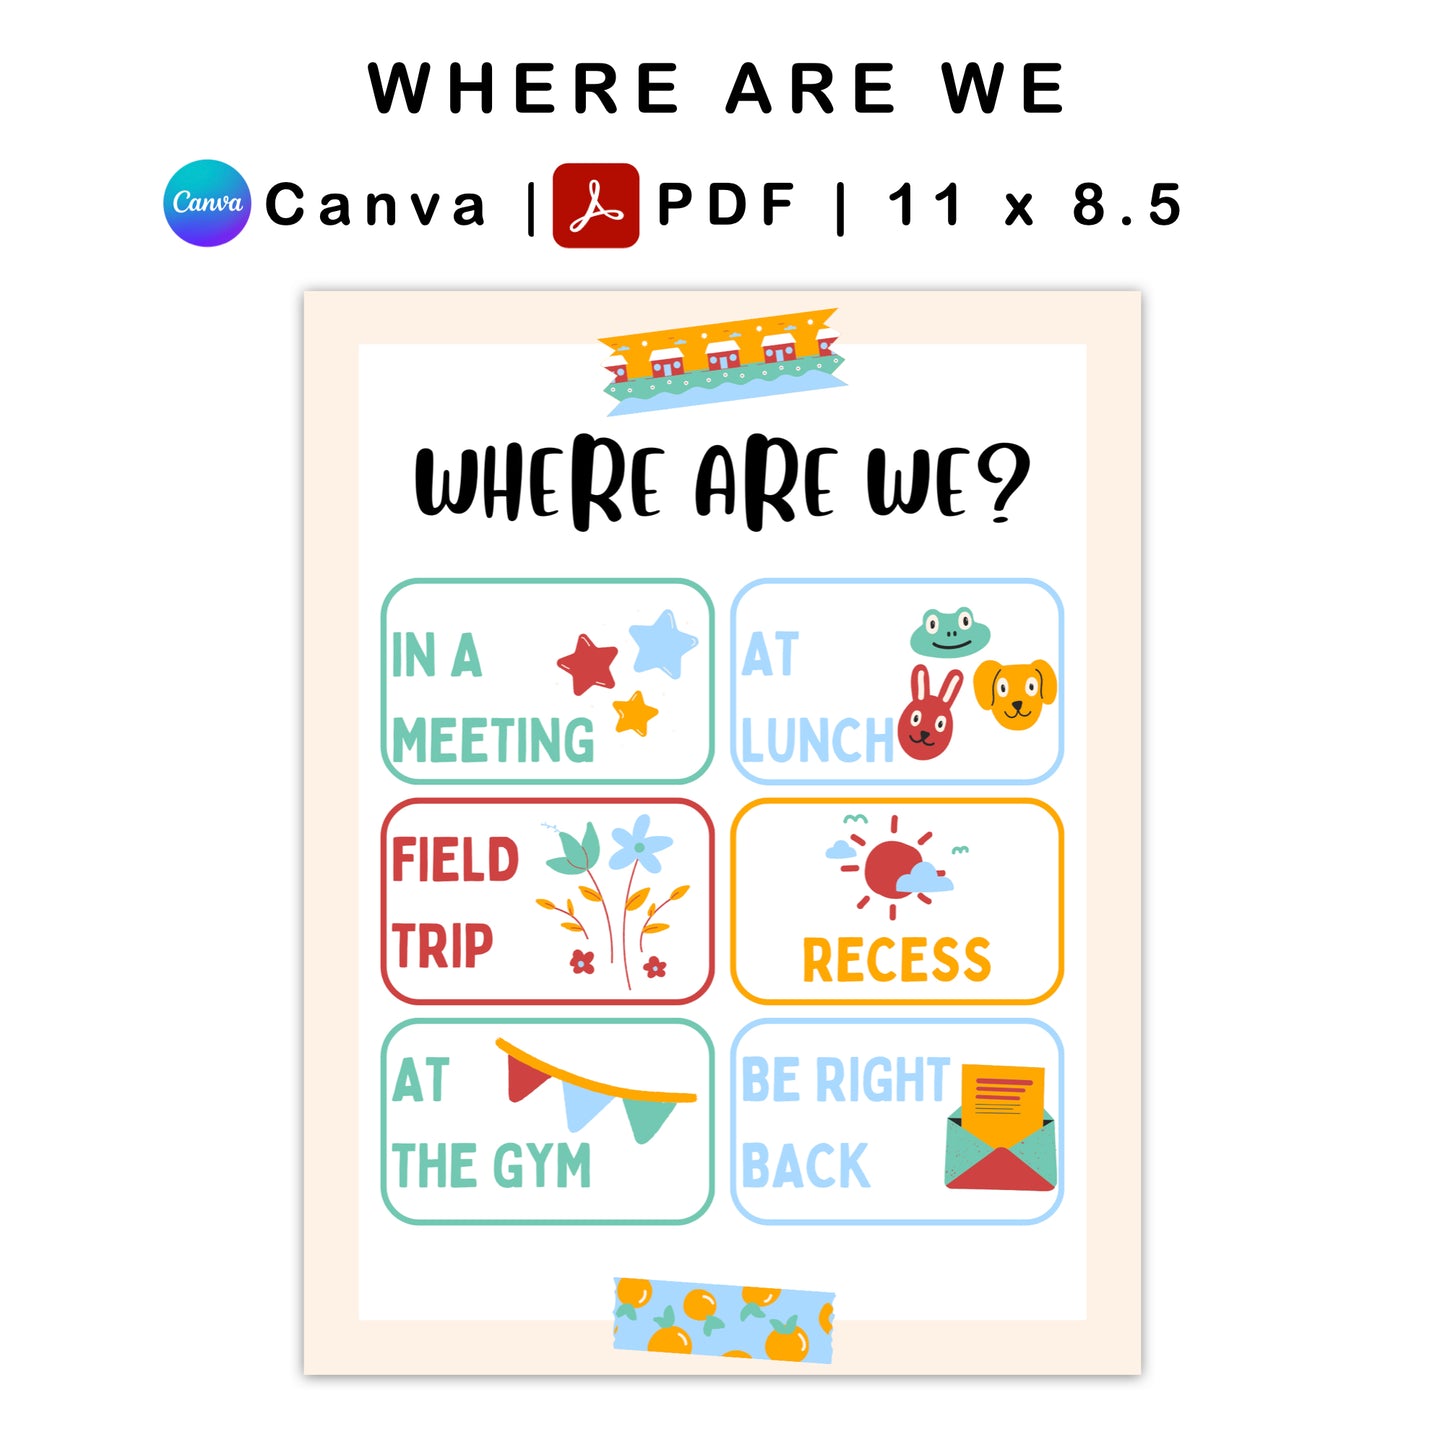 Where Are We Classroom Door Sign - Colorful Doodle Theme | Editable